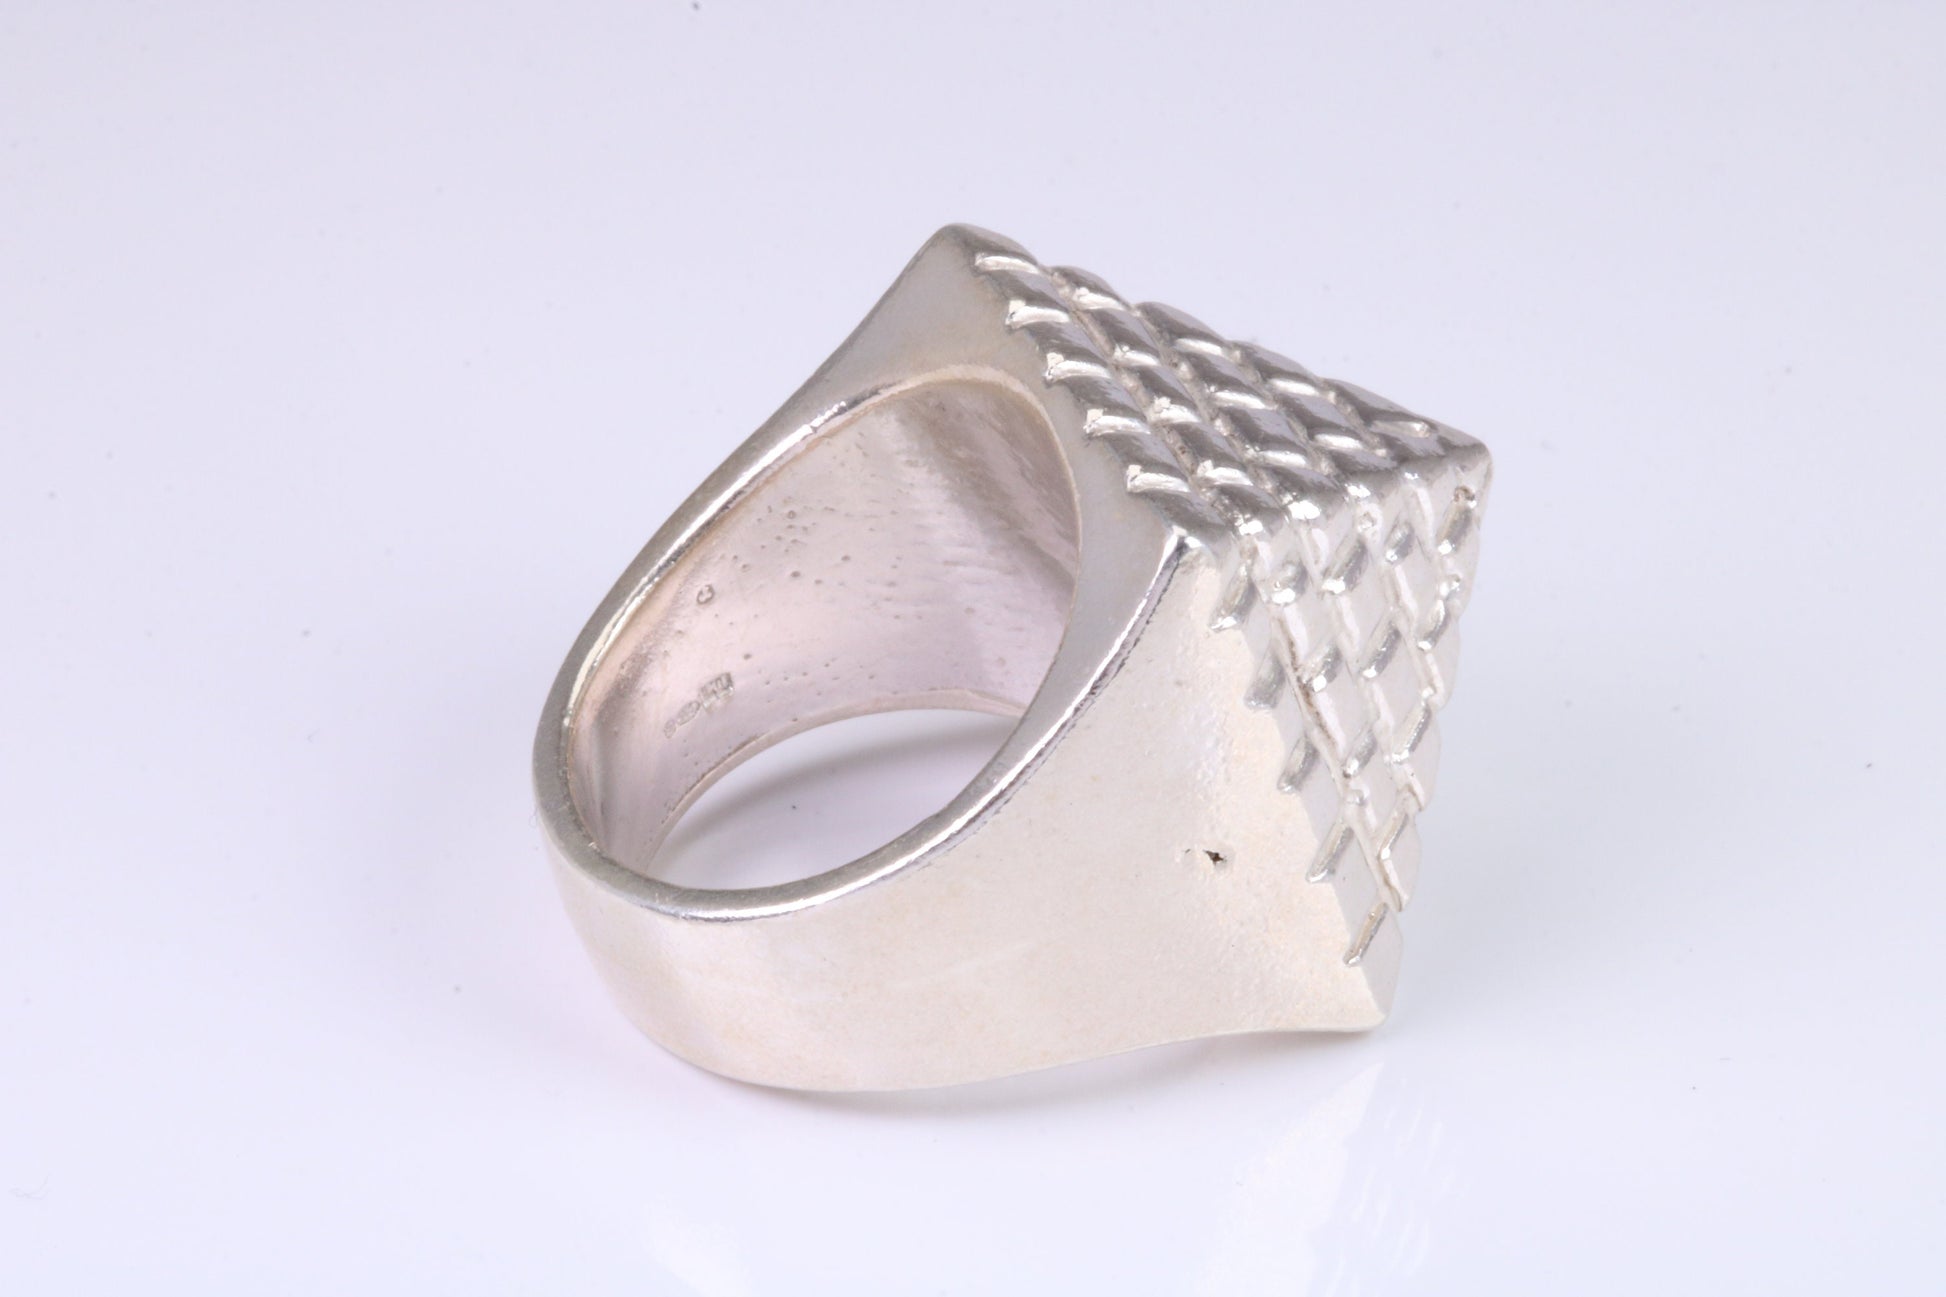 Very large and very heavy Pyramid ring,solid silver, perfect for ladies and gents. Available in silver, yellow gold, white gold and platinum